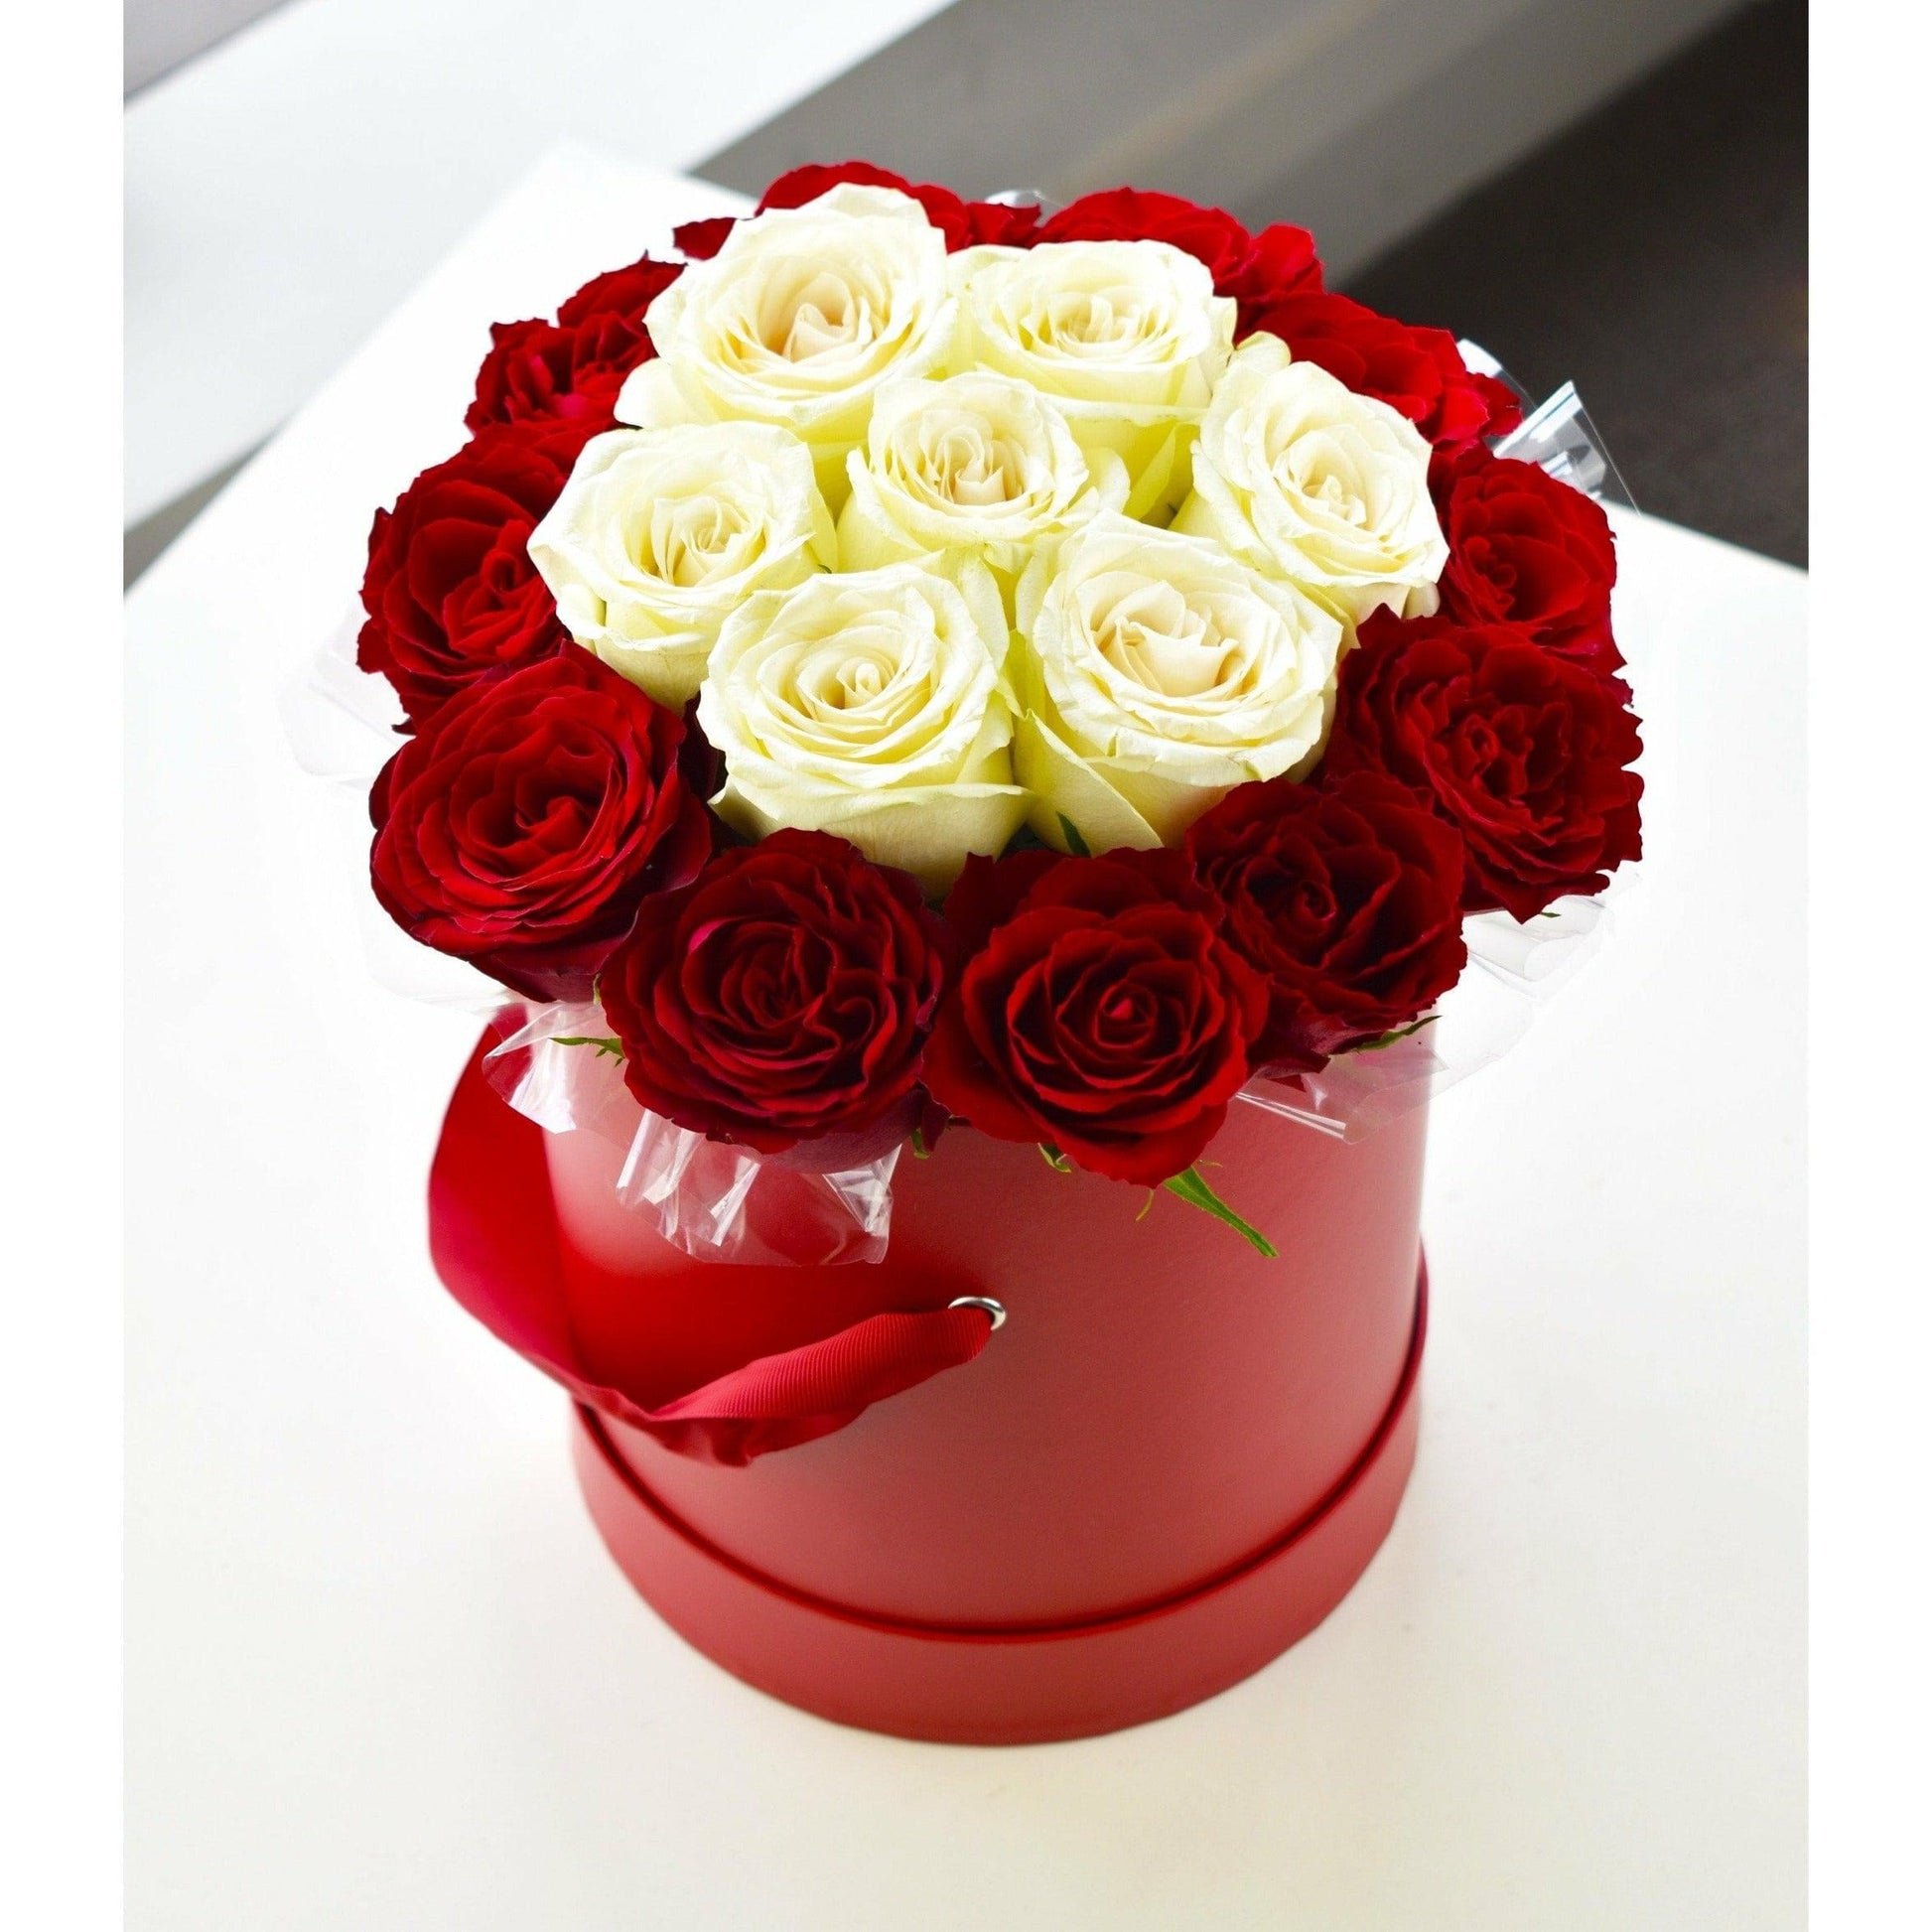 red and white rose box, box flowers and arrangment  - Officeflower